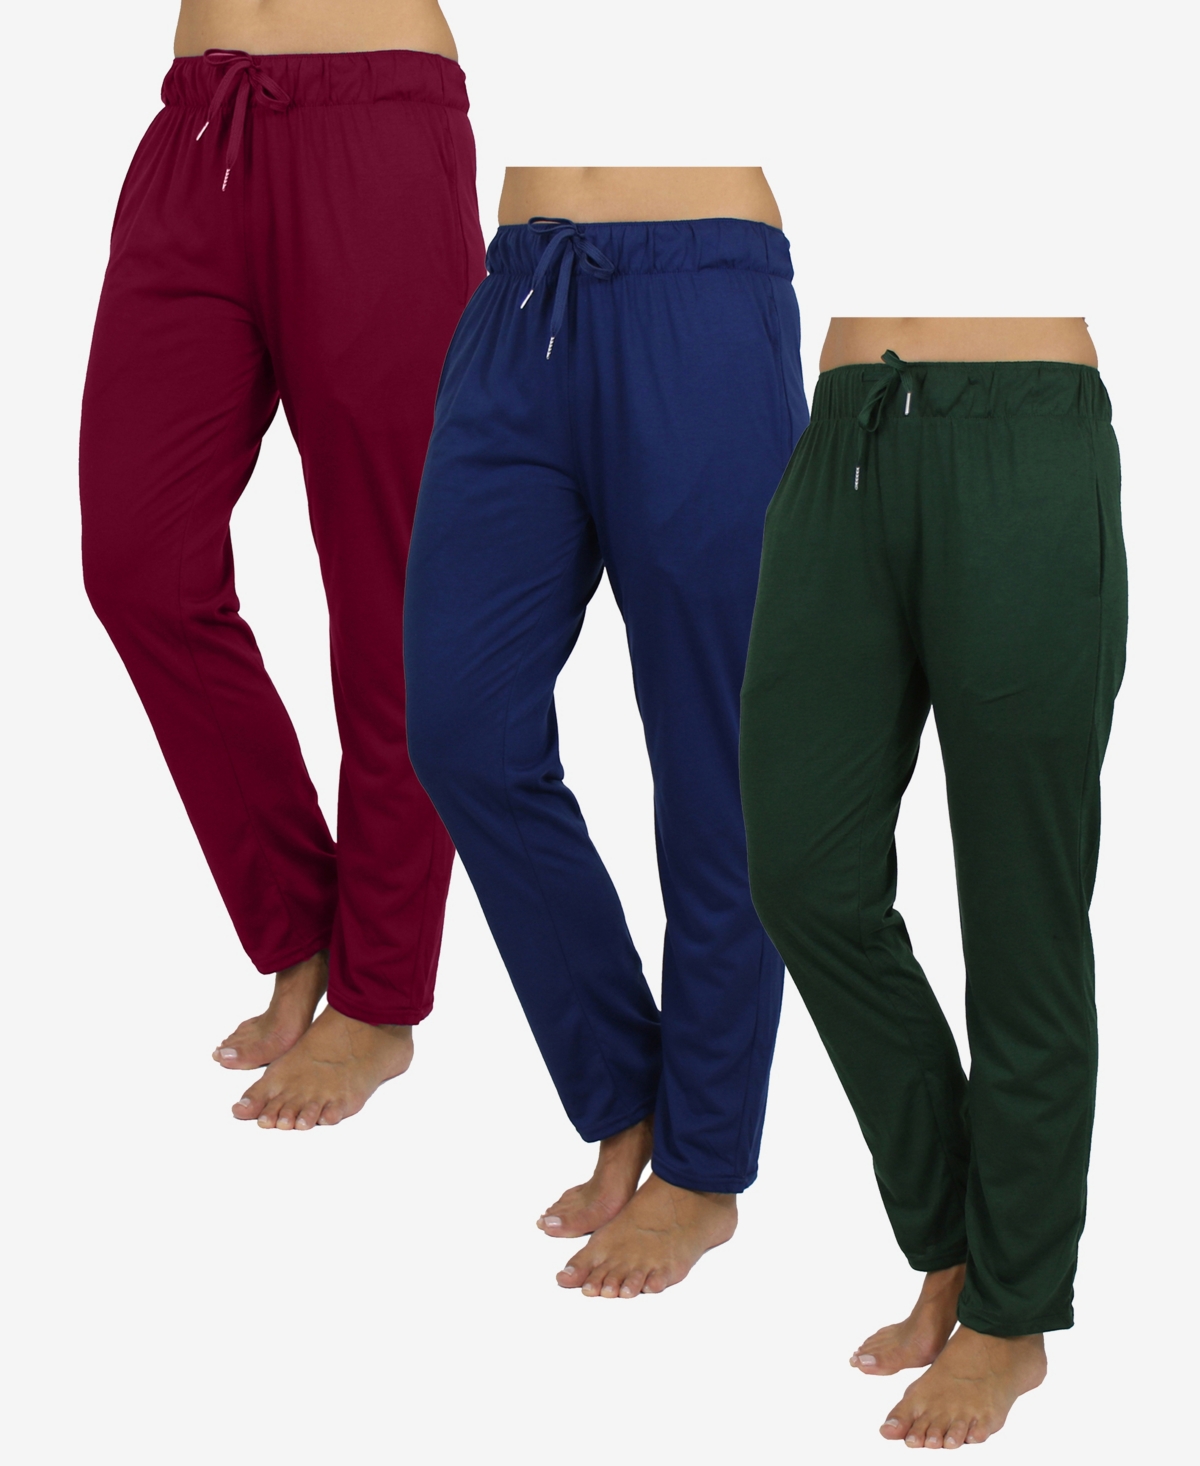 Galaxy By Harvic Women's Loose Fit Classic Lounge Pants, Pack of 3